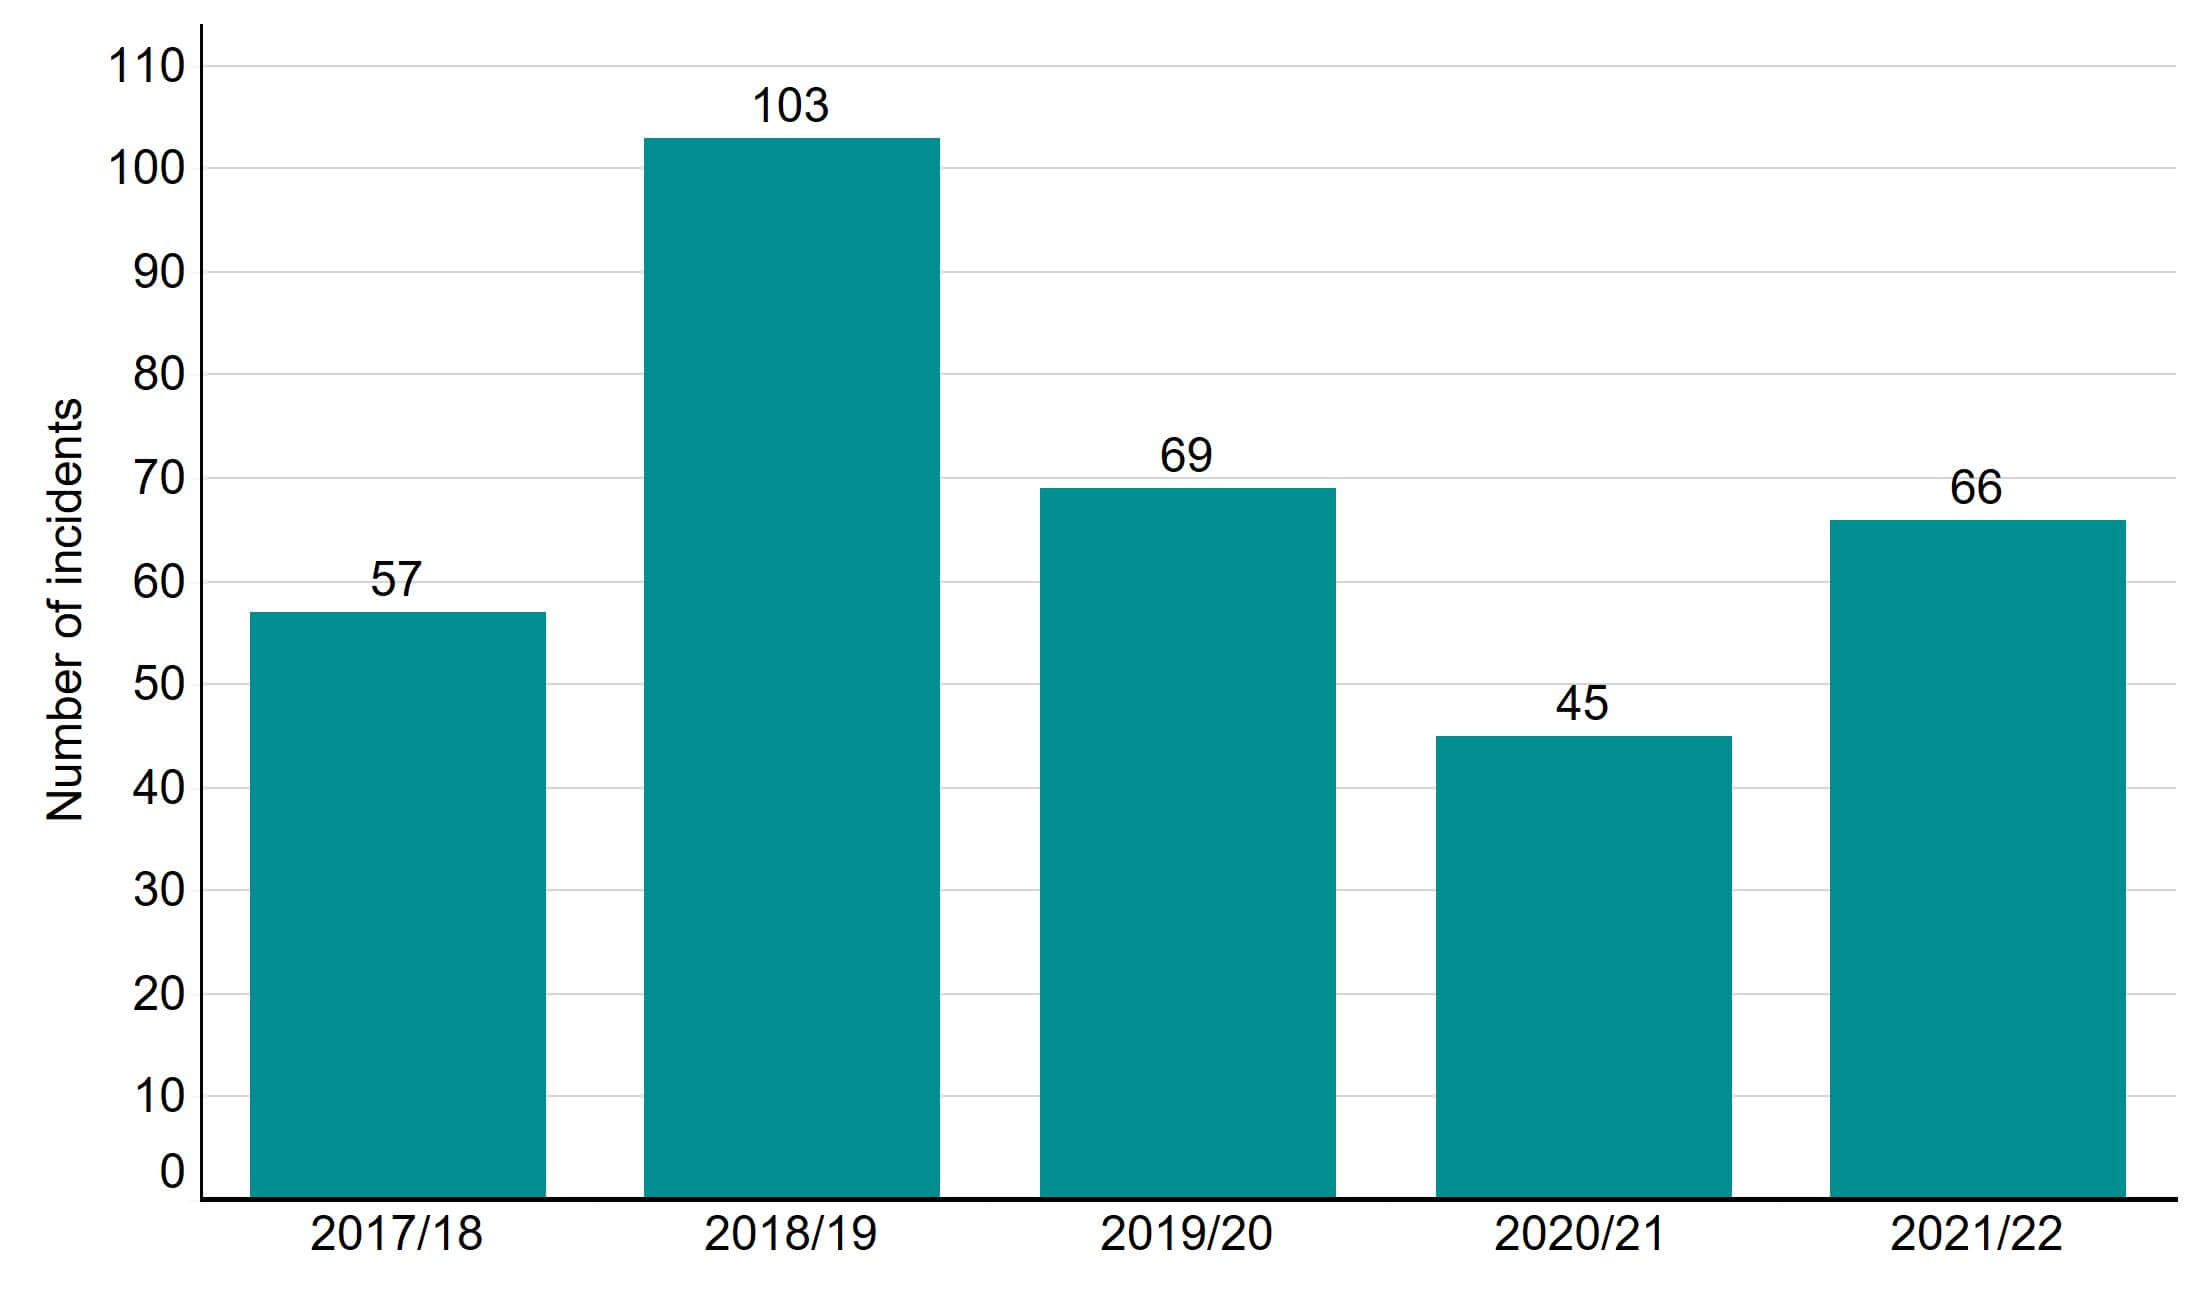 Figure 6: Number of severe and critical OHSS incidents reported 2016/17 – 2021/22. Number of severe and critical OHSS incidents reported 2016/17 – 2021/22. This bar chart shows the number of severe and critical OHSS incidents reported each financial year from 2017/18 to 2021/22. In 2021/22 there were 66 cases of severe and critical OHSS reported by UK licensed clinics which remains consistent with previous years. An accessible form of the underlying data for this figure can be downloaded at the start of the report in .xls format.